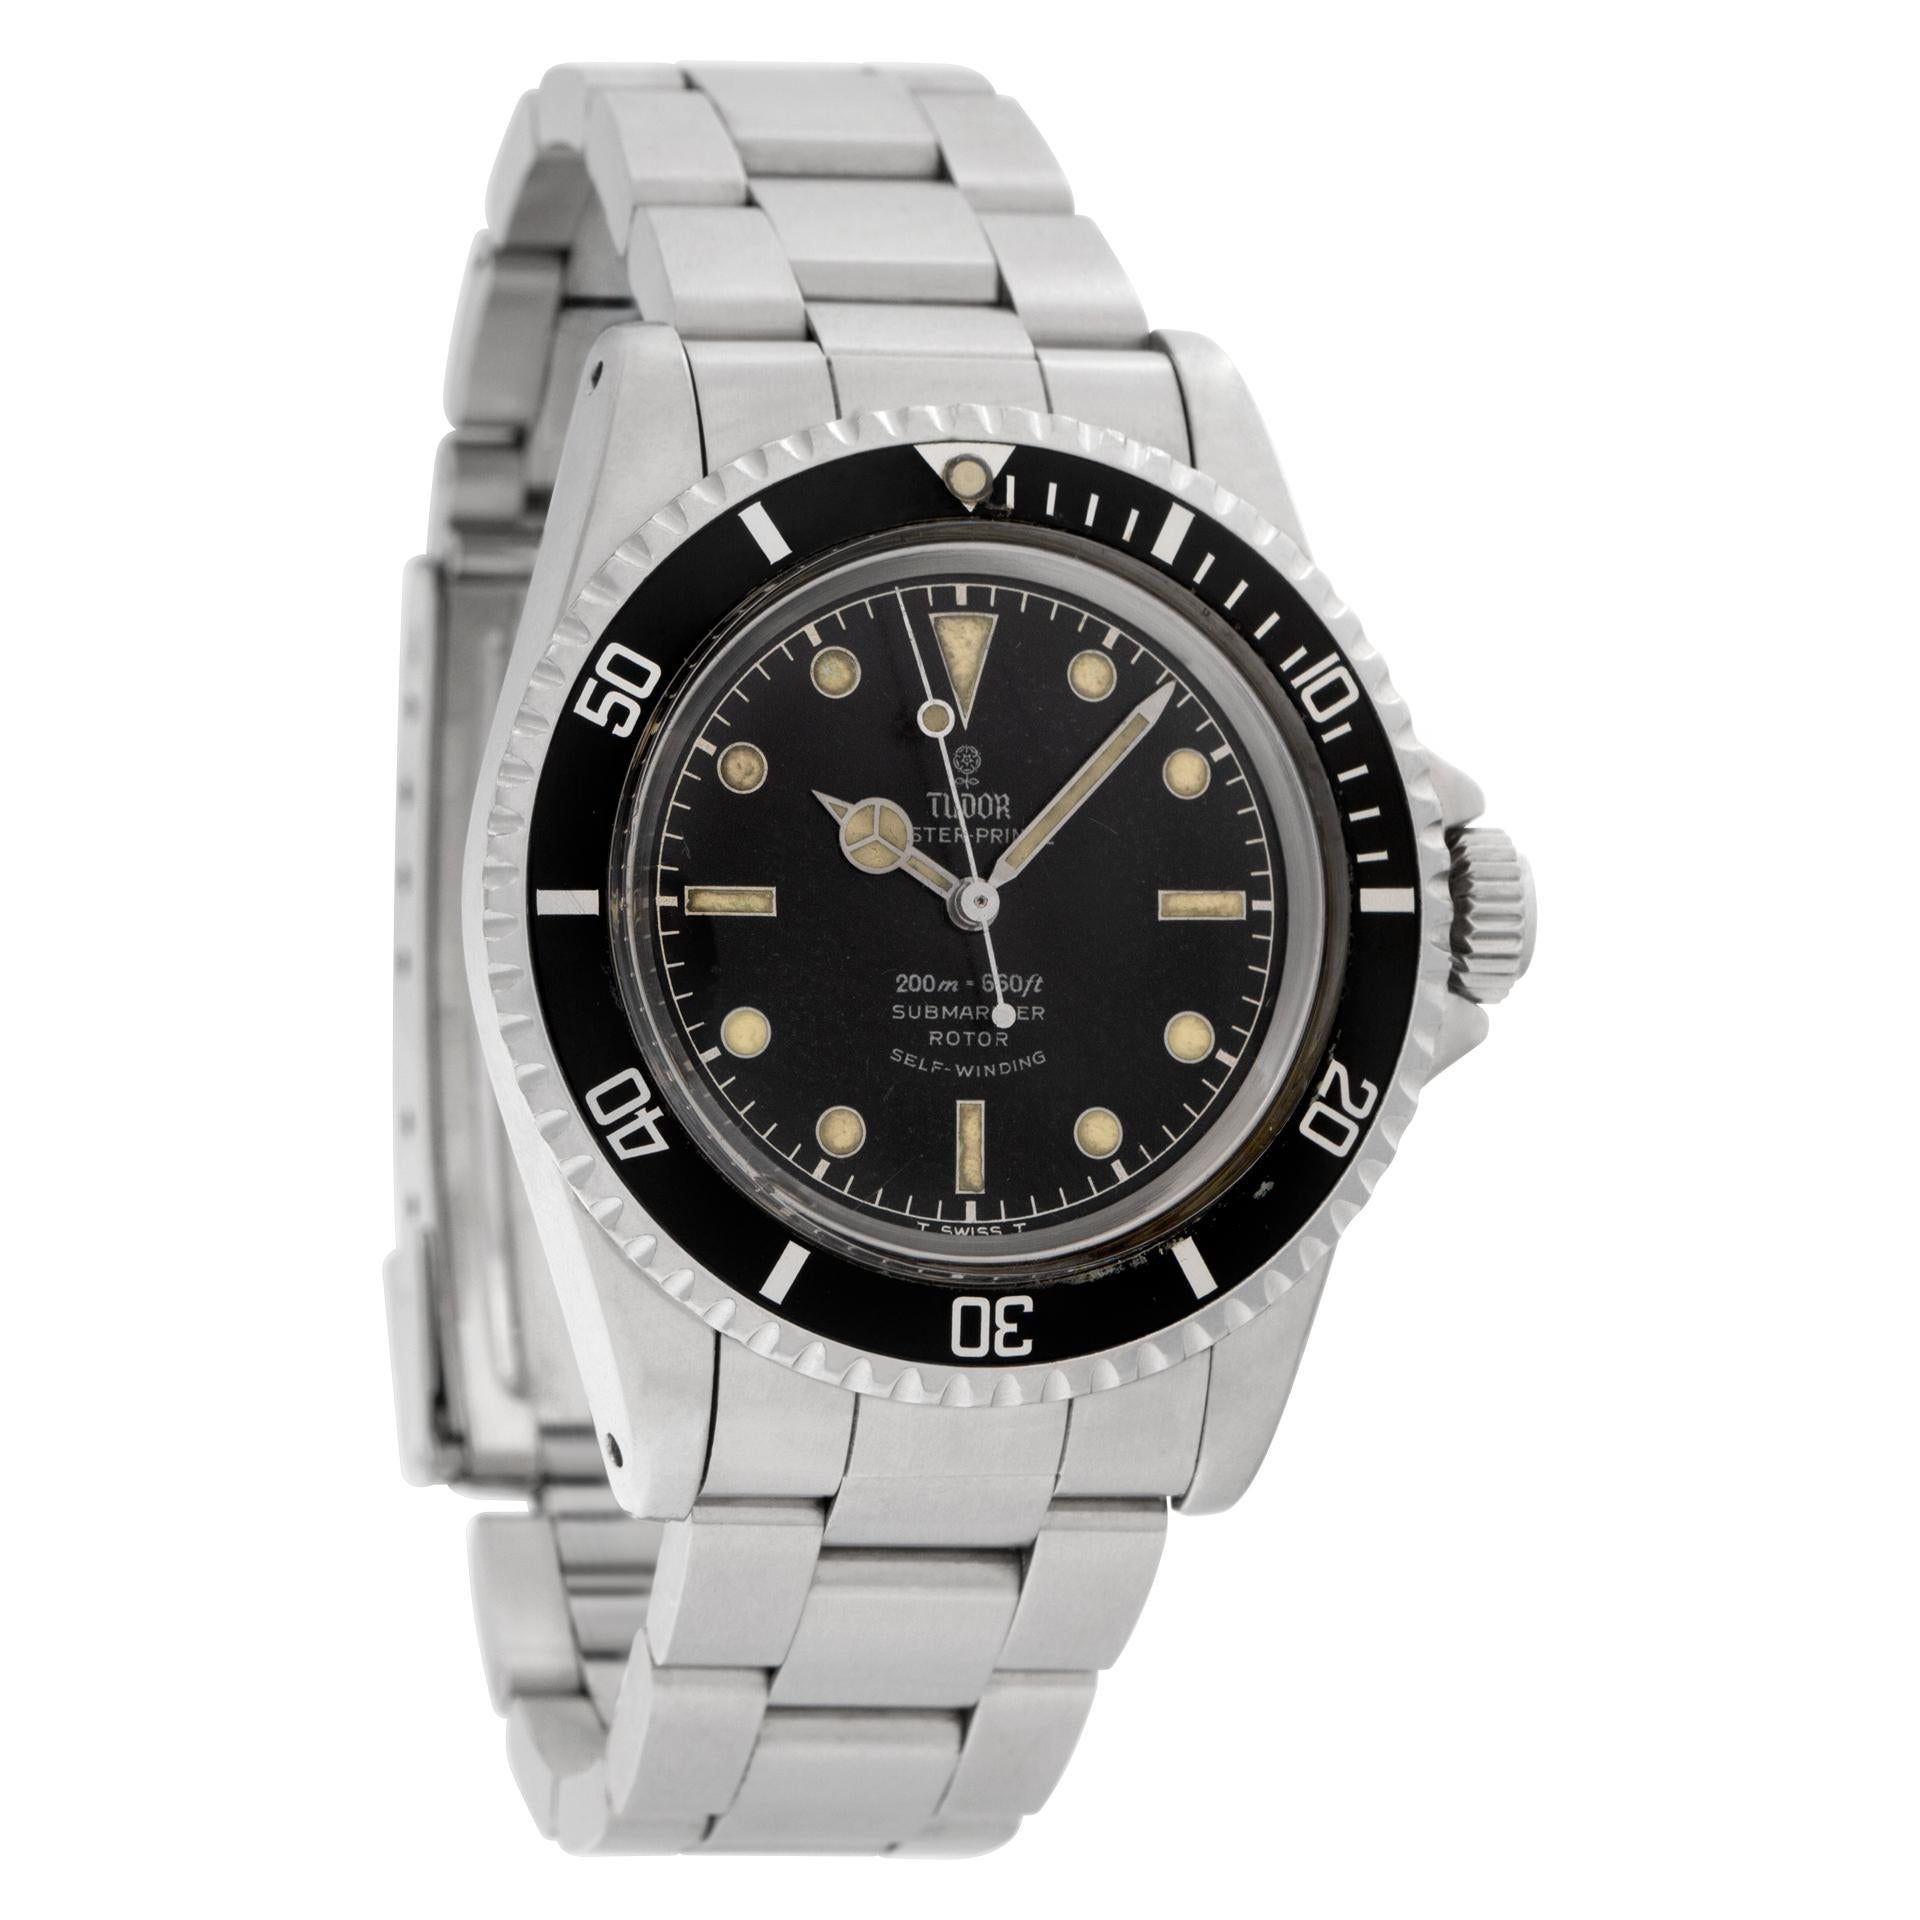 Tudor Submariner stainless steel Auto Wristwatch No Date Ref 7928 In Excellent Condition For Sale In Surfside, FL